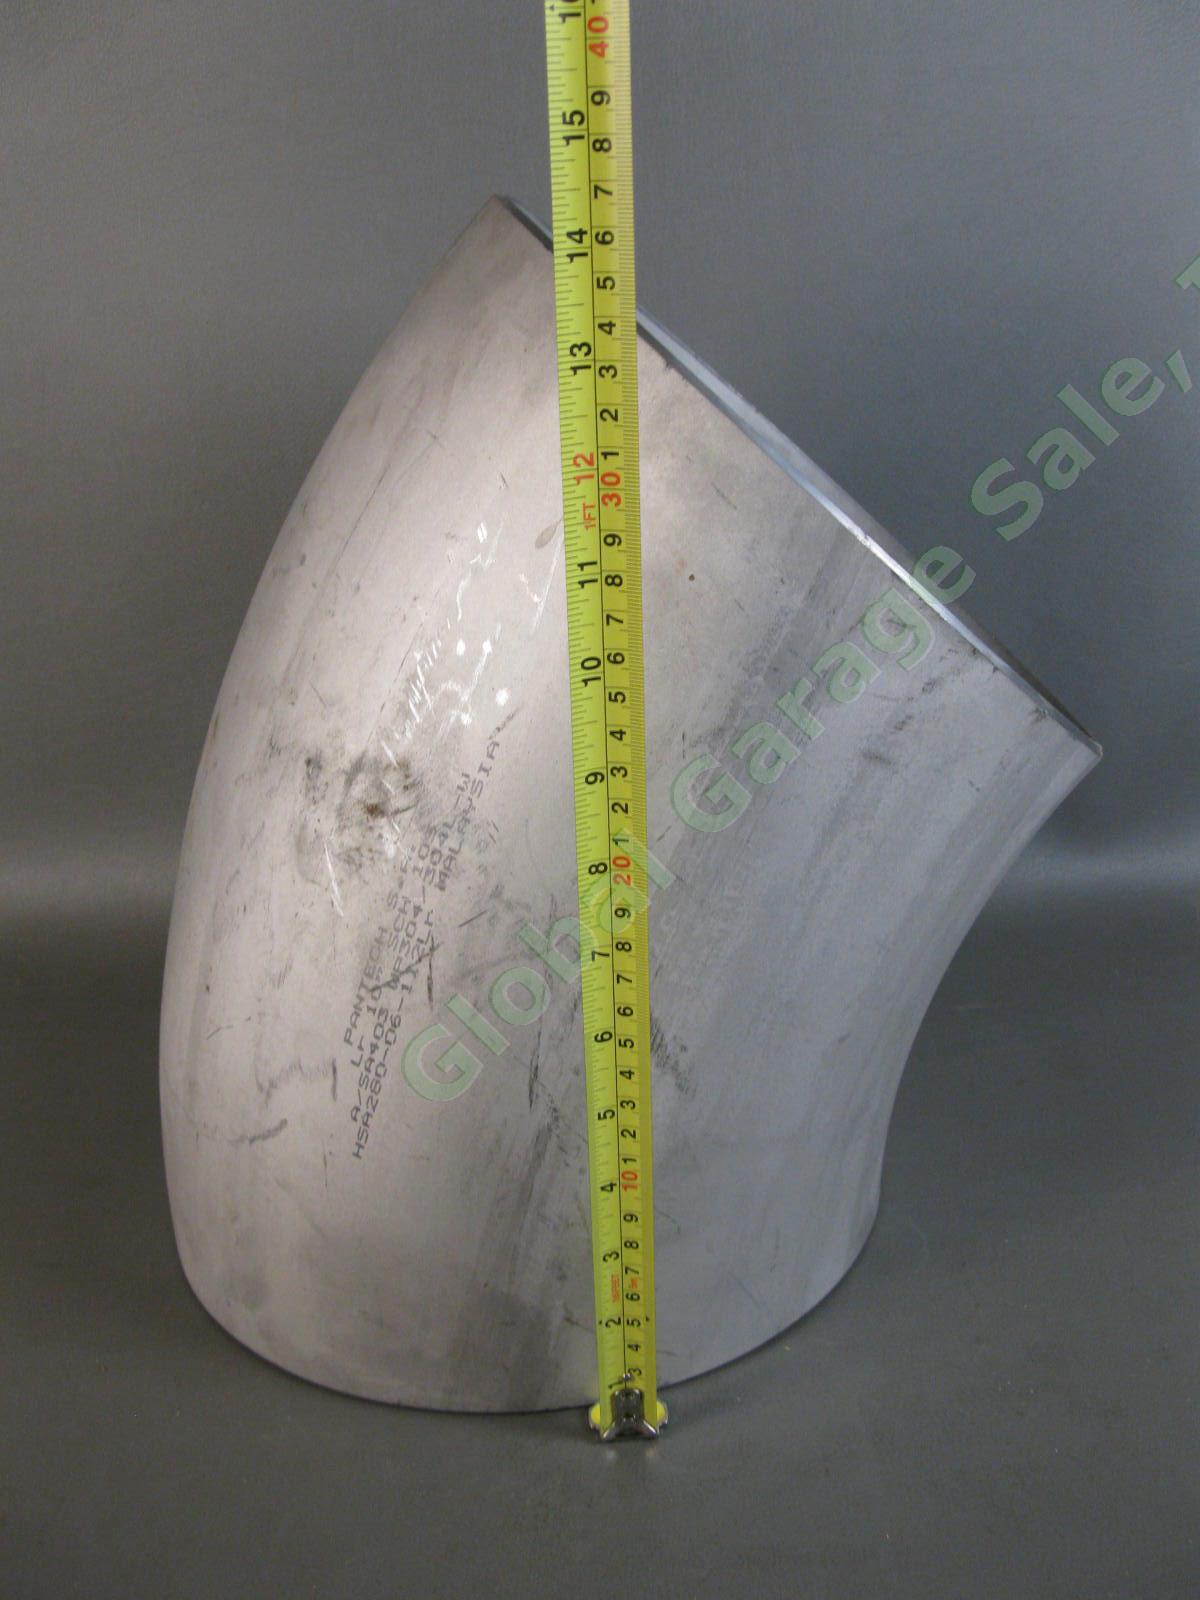 10"In Stainless Steel SS304 Sch10 Weld 45 90 Degree Elbow Tee Fitting Flange LOT 4